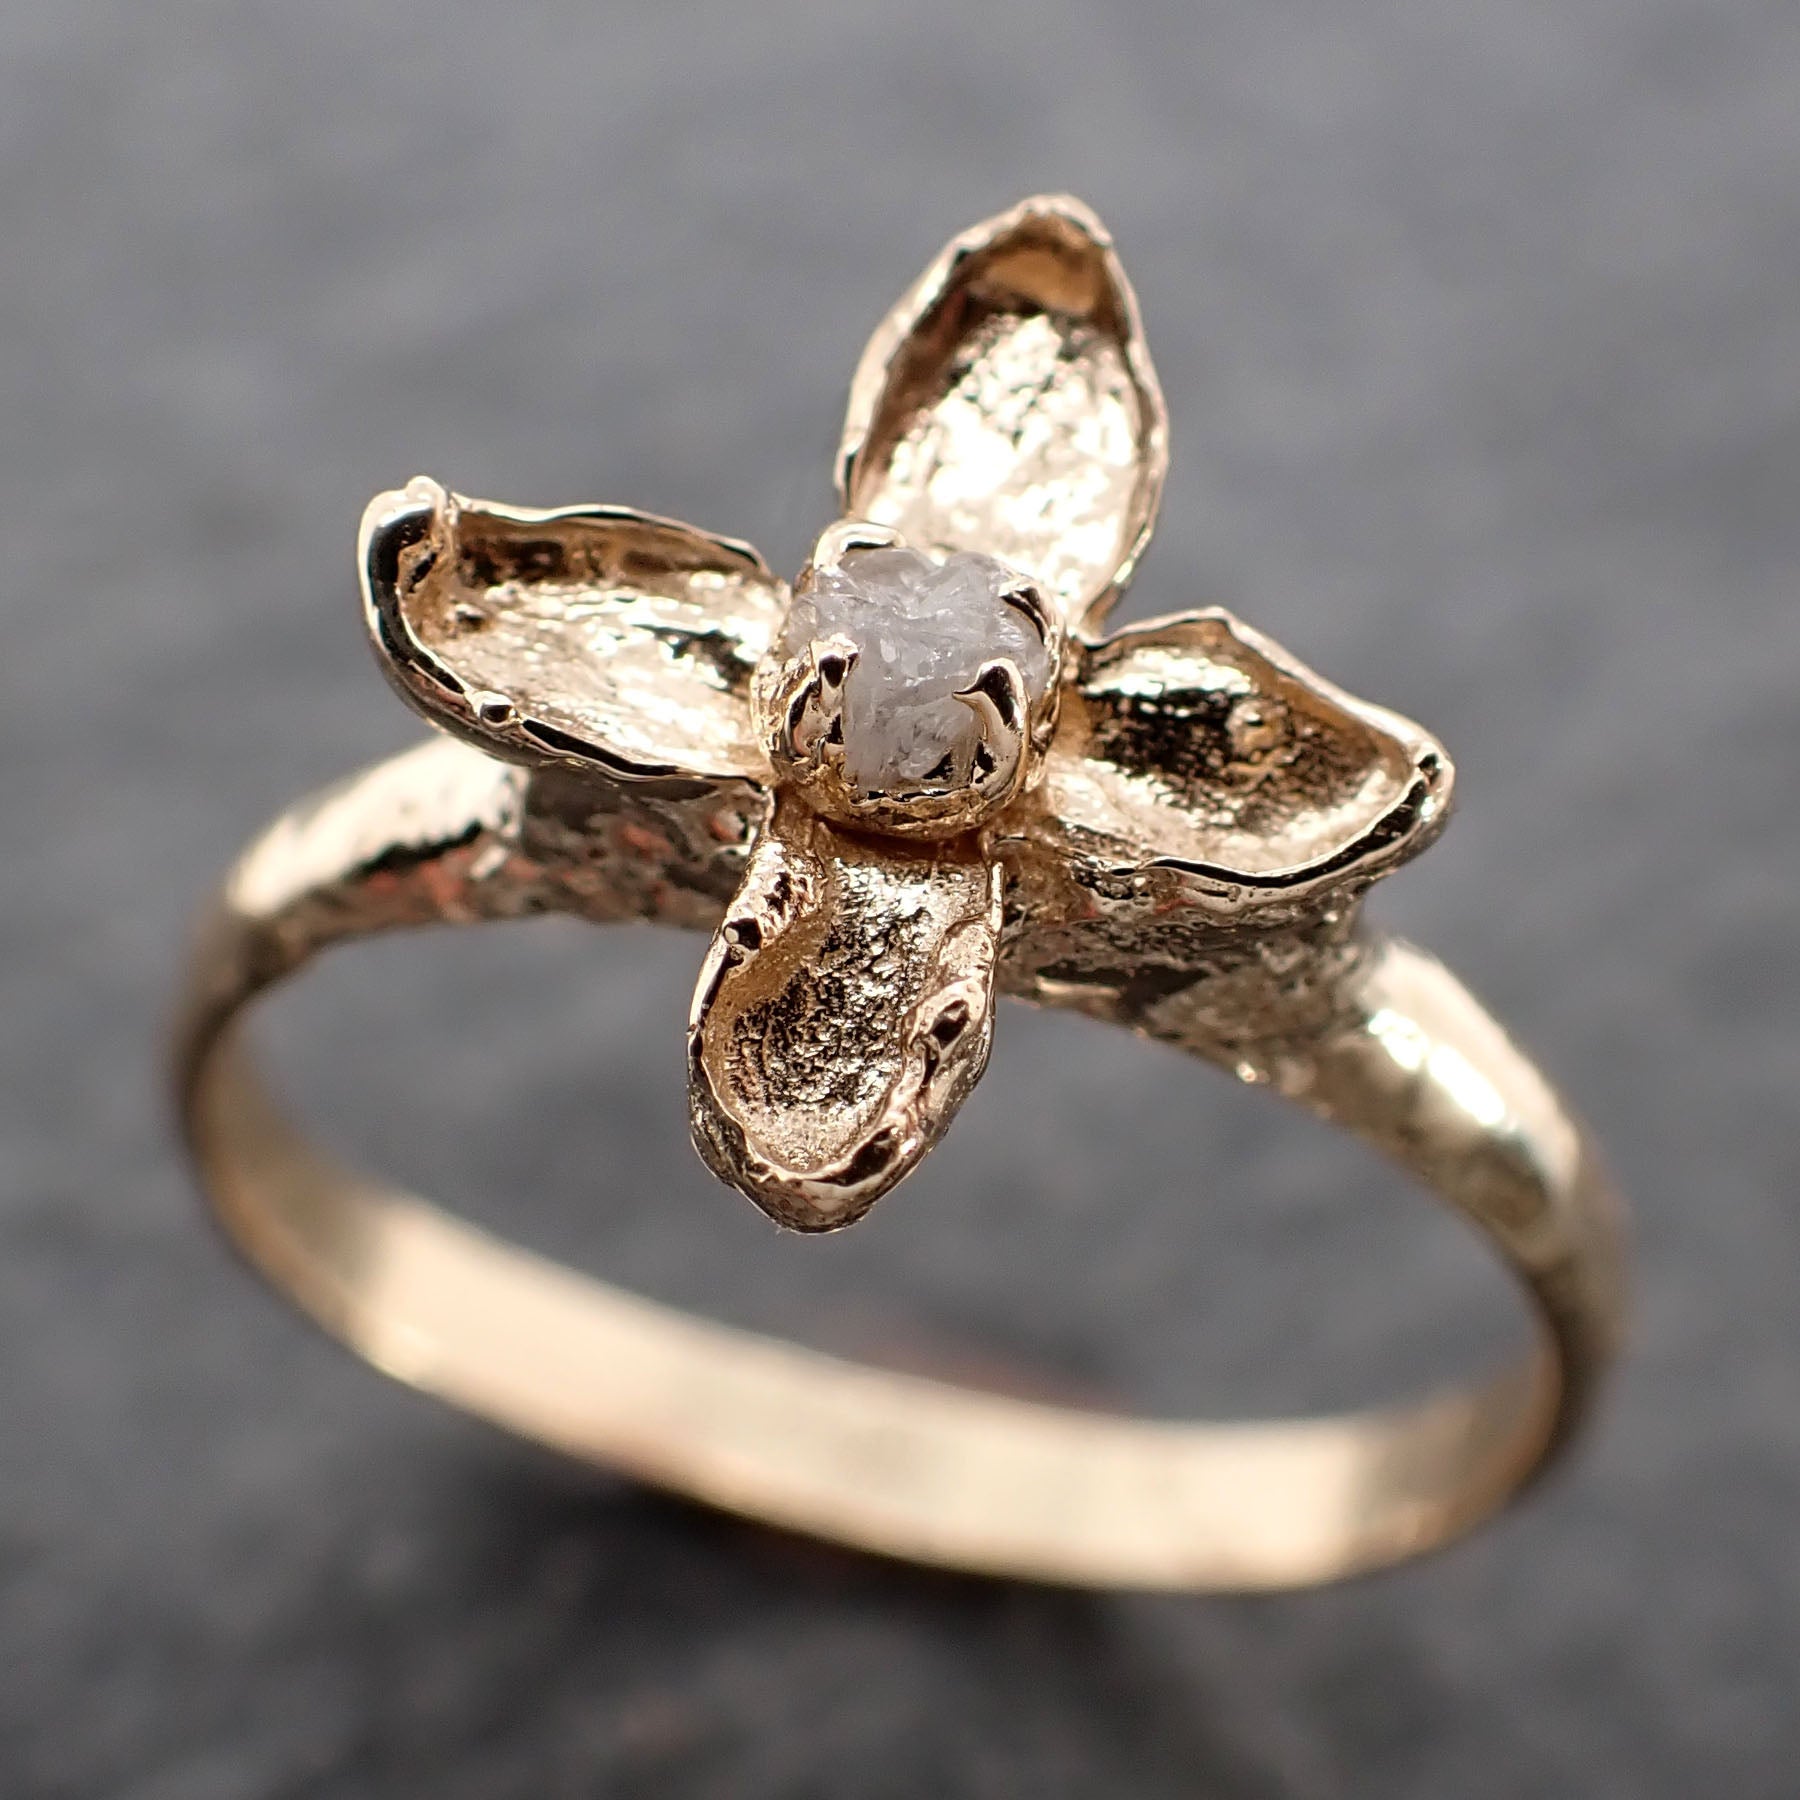 Real Lilac Flower and rough diamond 14k yellow gold wedding engagement ring Enchanted Garden Floral Ring byAngeline 2502